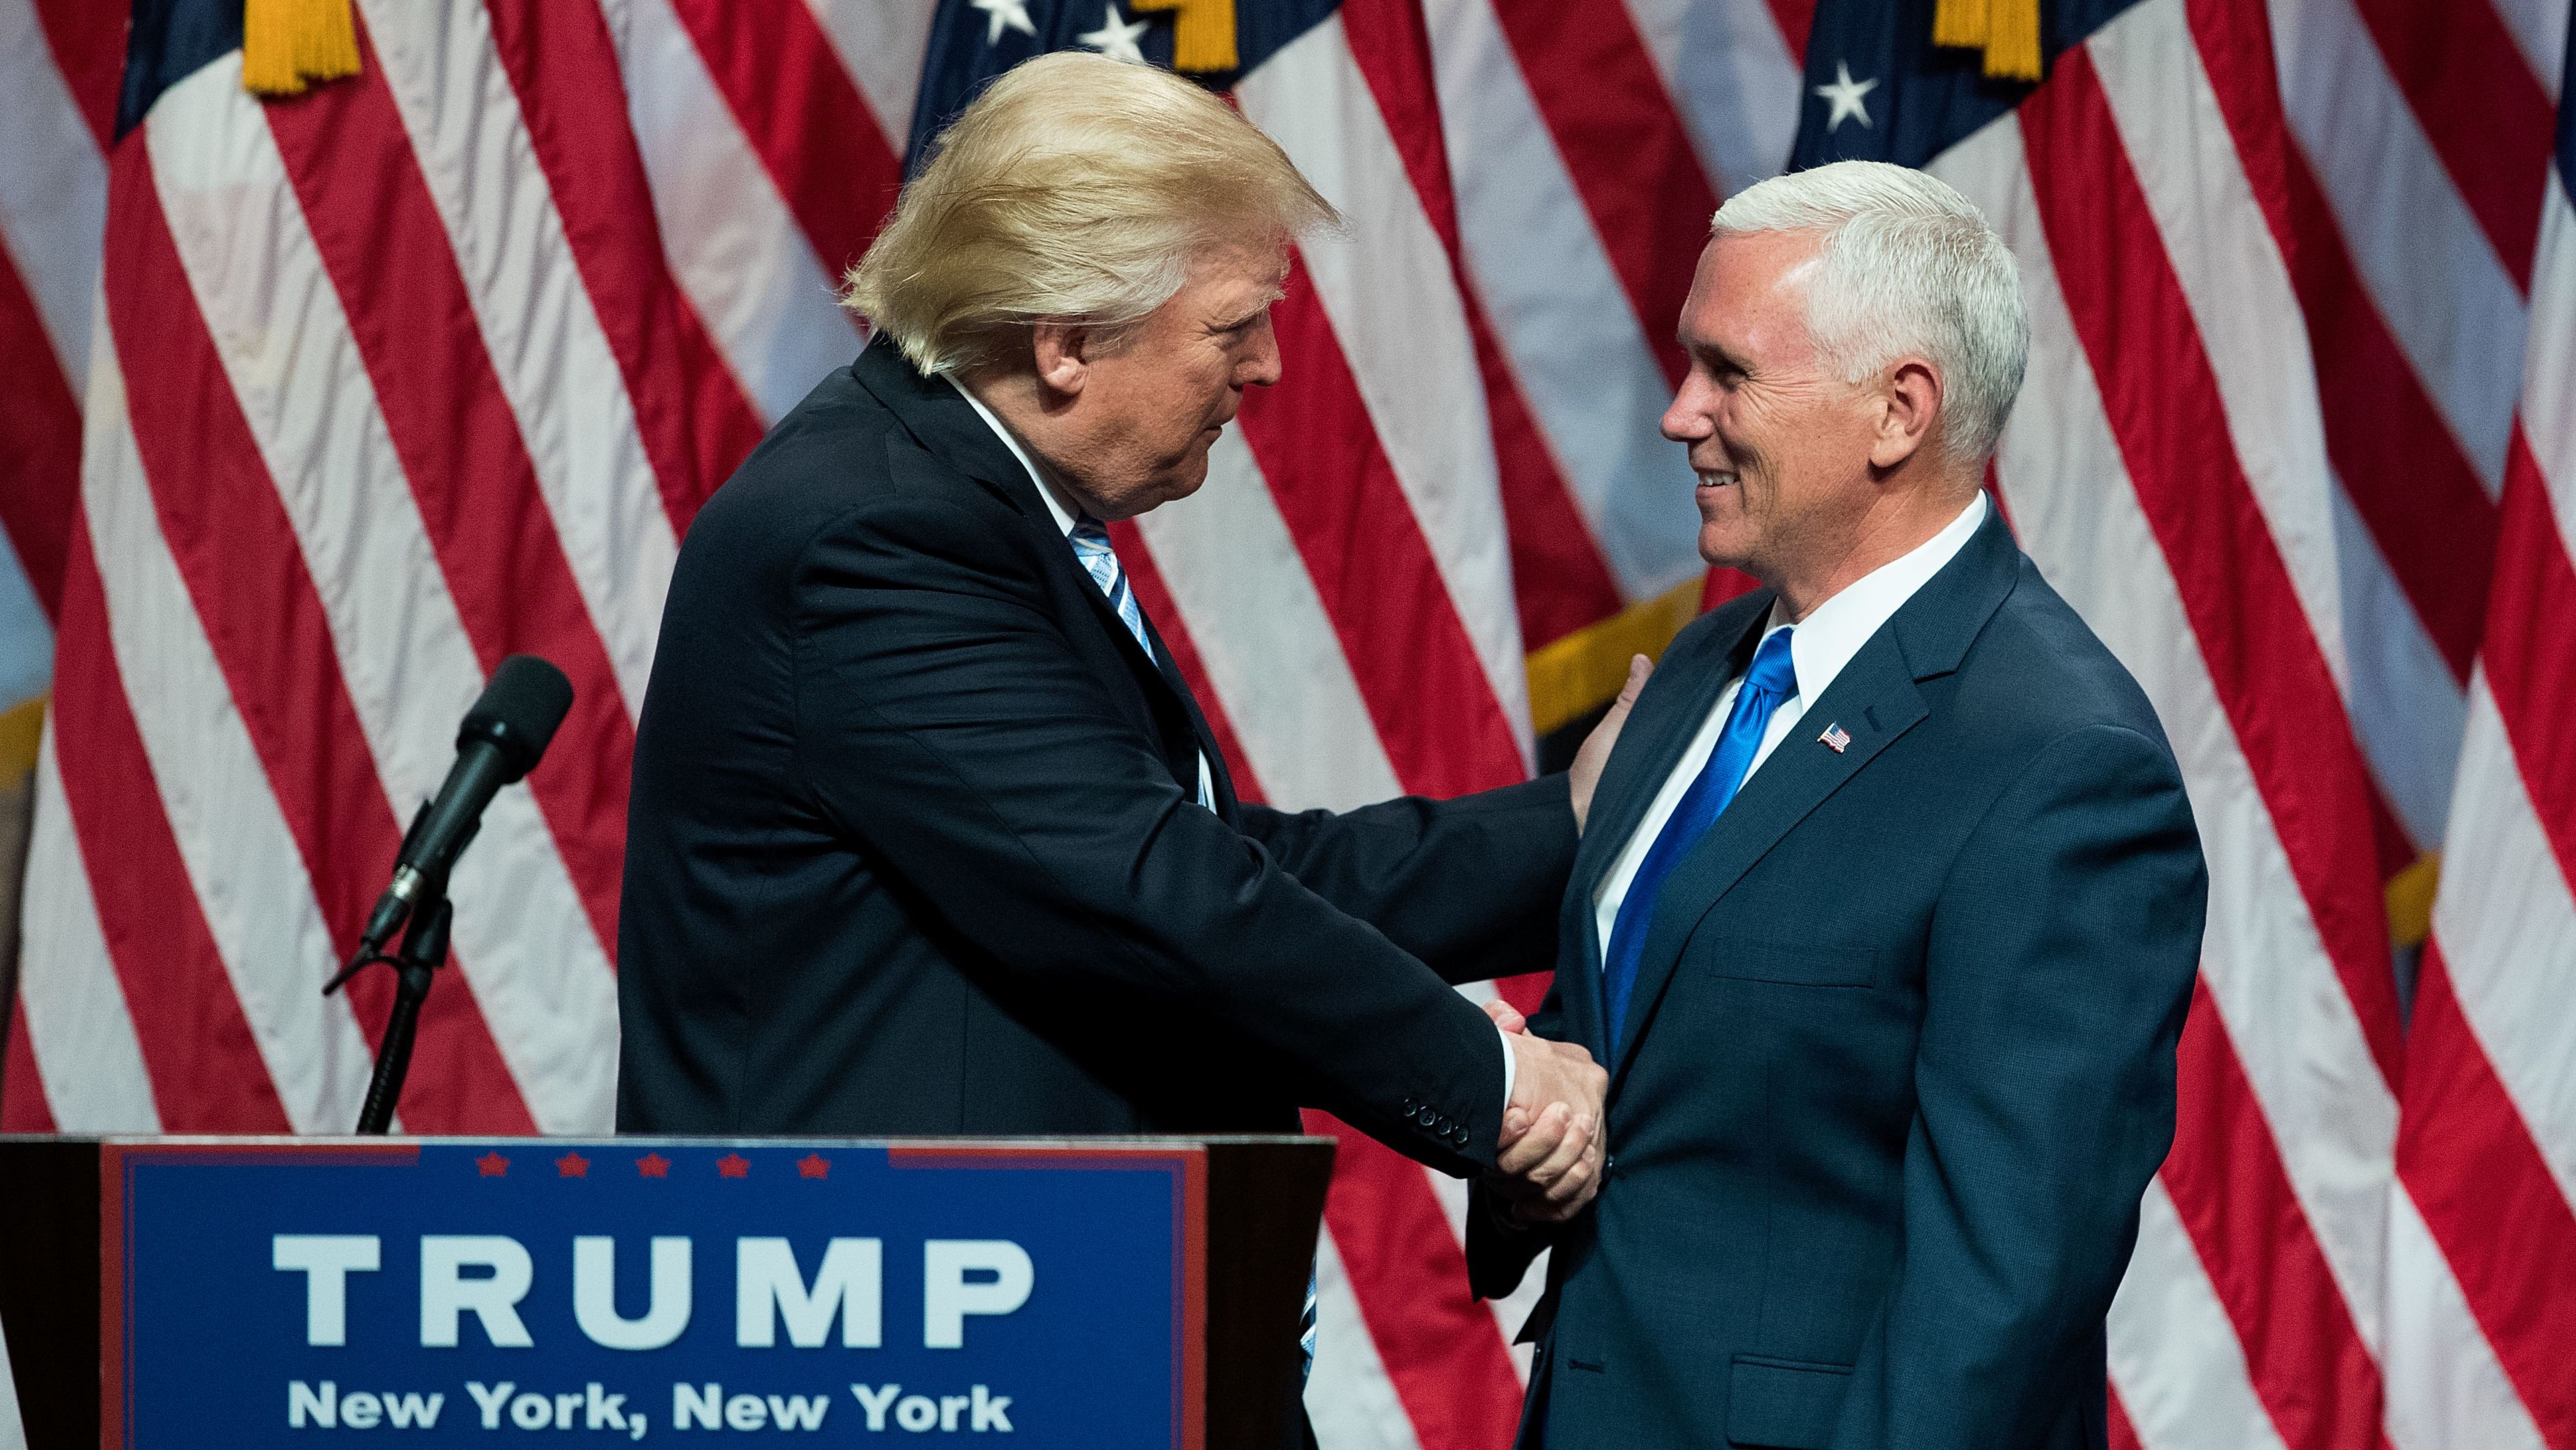 Pence shakes hands with Trump after being selected as his running mate in July 2016.